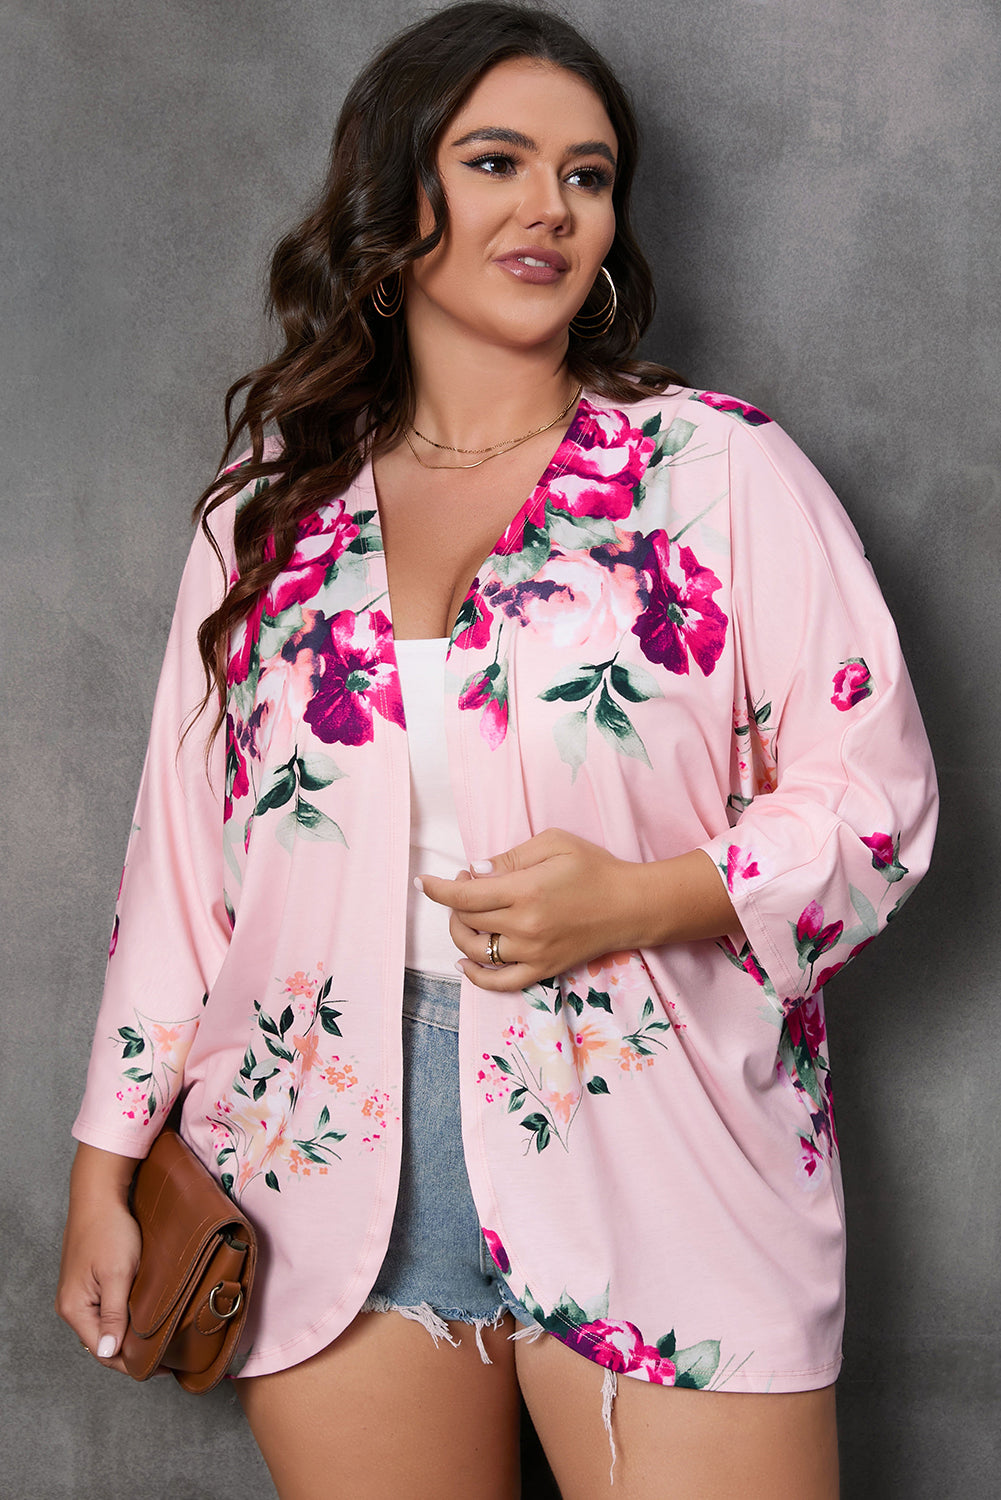 Stay cool in style! This pink plus size floral print kimono is perfect for any occasion.